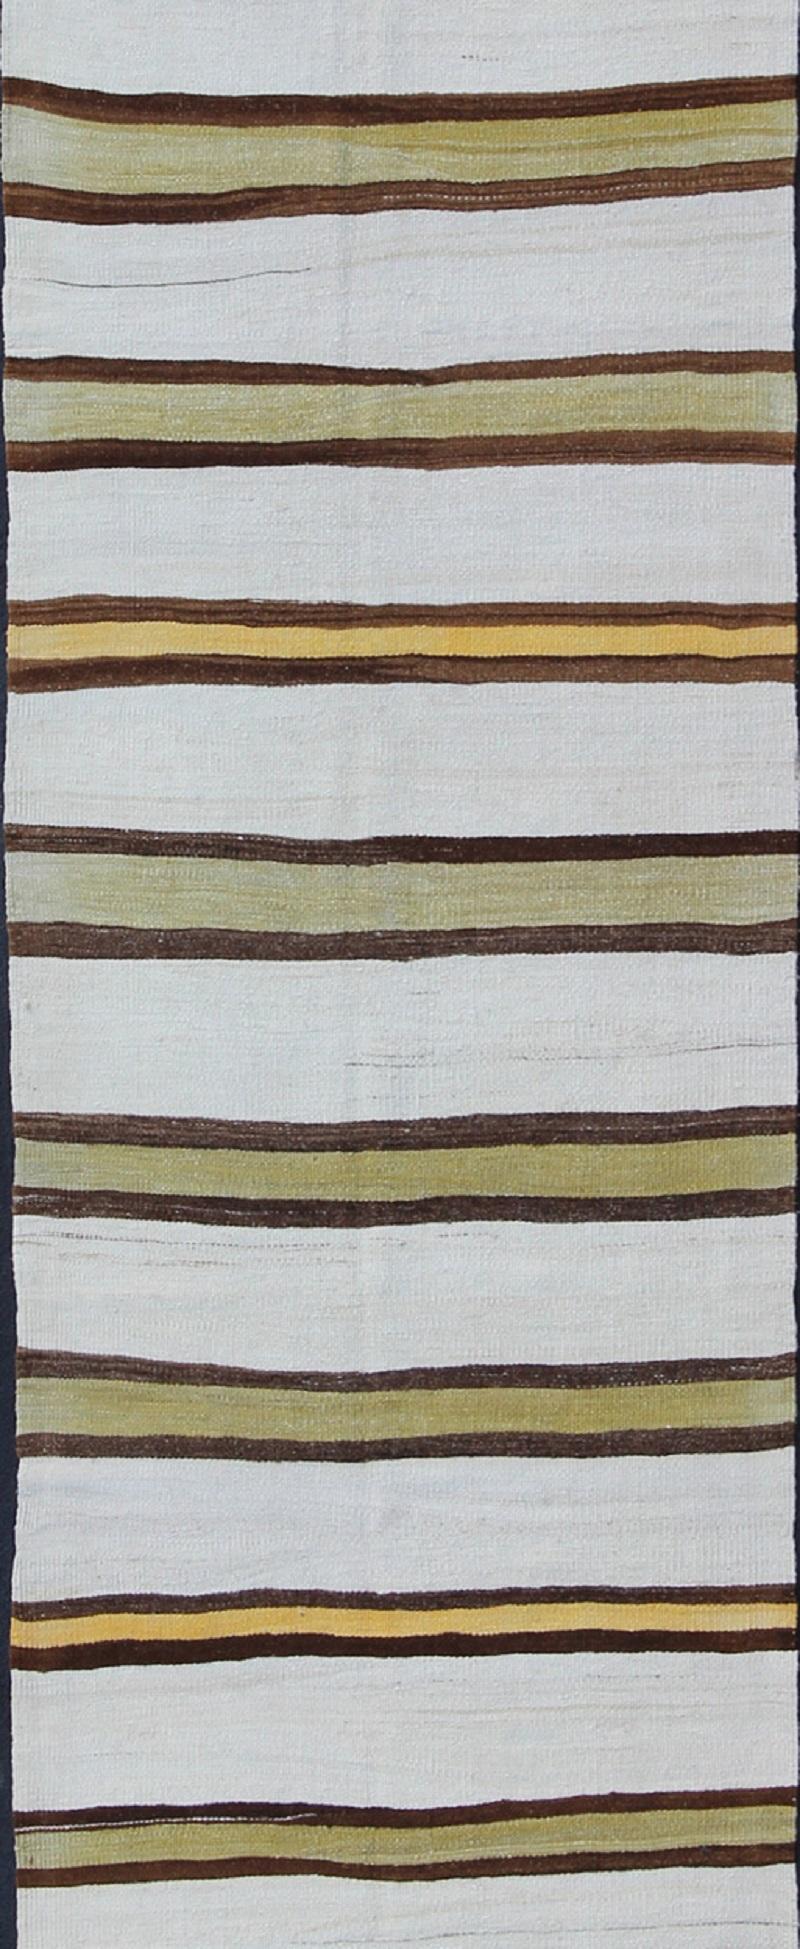 Hand-Knotted Vintage Turkish Striped Kilim Flat-Weave Runner in White, Yellow, Green, Brown